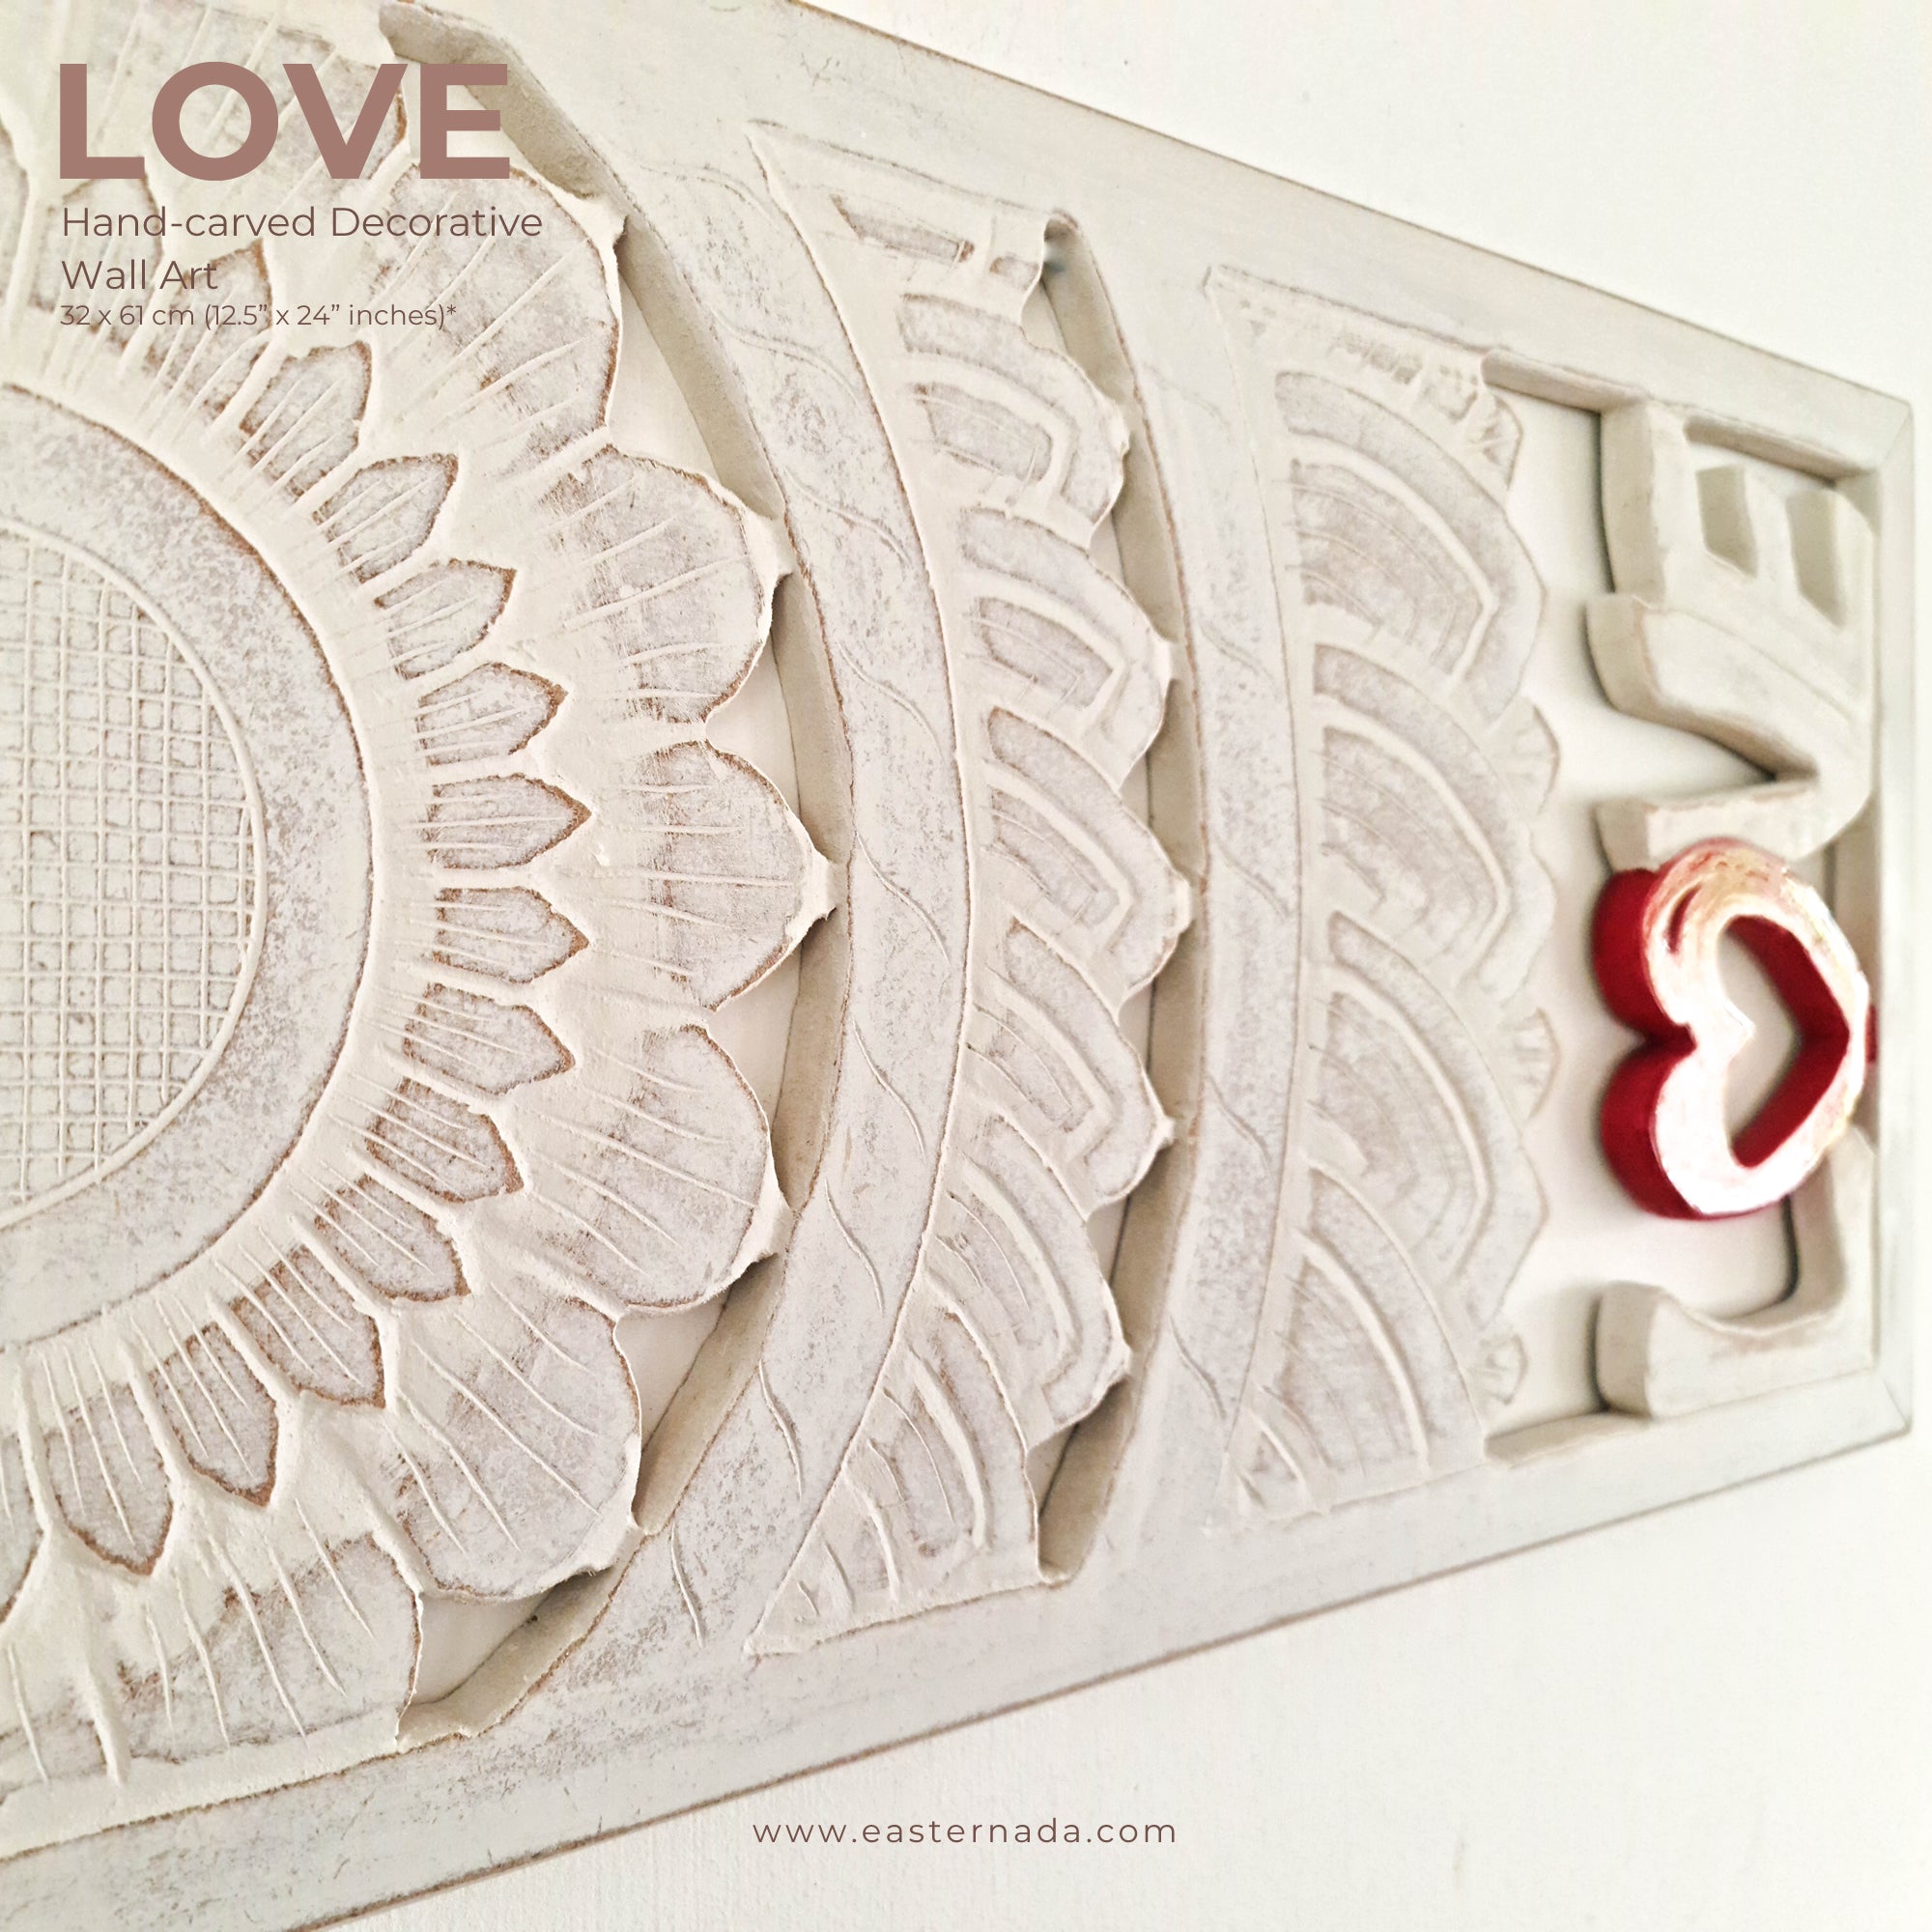 Bohemian Mandala Valentine Love hand-carved wooden wall art. An exclusive design to compliment any room. Stunning mandala with calligraphy Love. A perfect gift for a loved one